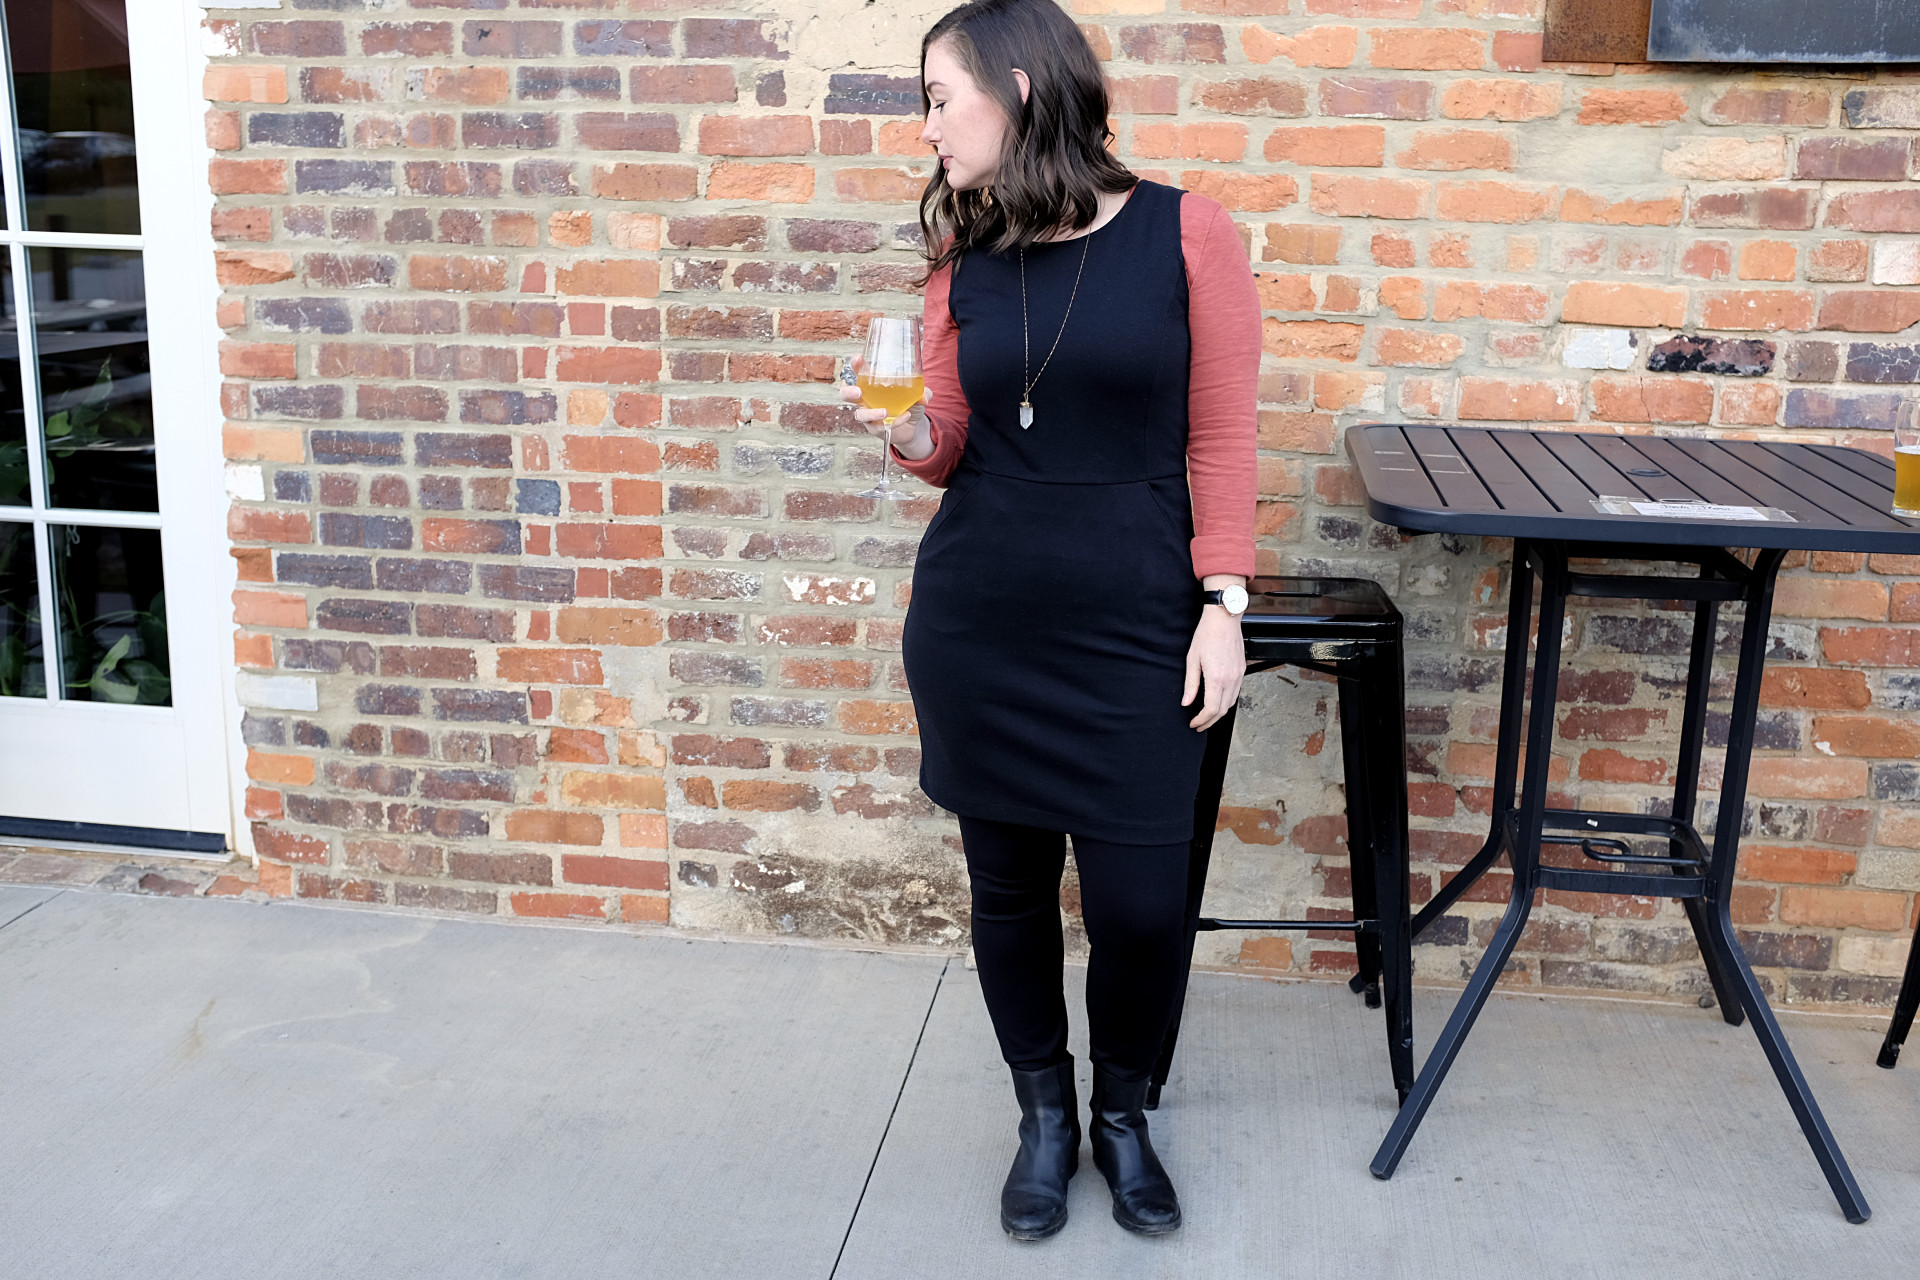 A white woman stands in front of a table which is in front of a brick wall. She is wearing a red-orange long sleeve tee under a black sheath dress, over black ponte pants with chelsea boots. She is holding a beer in a stemmed glass and looking to her right.